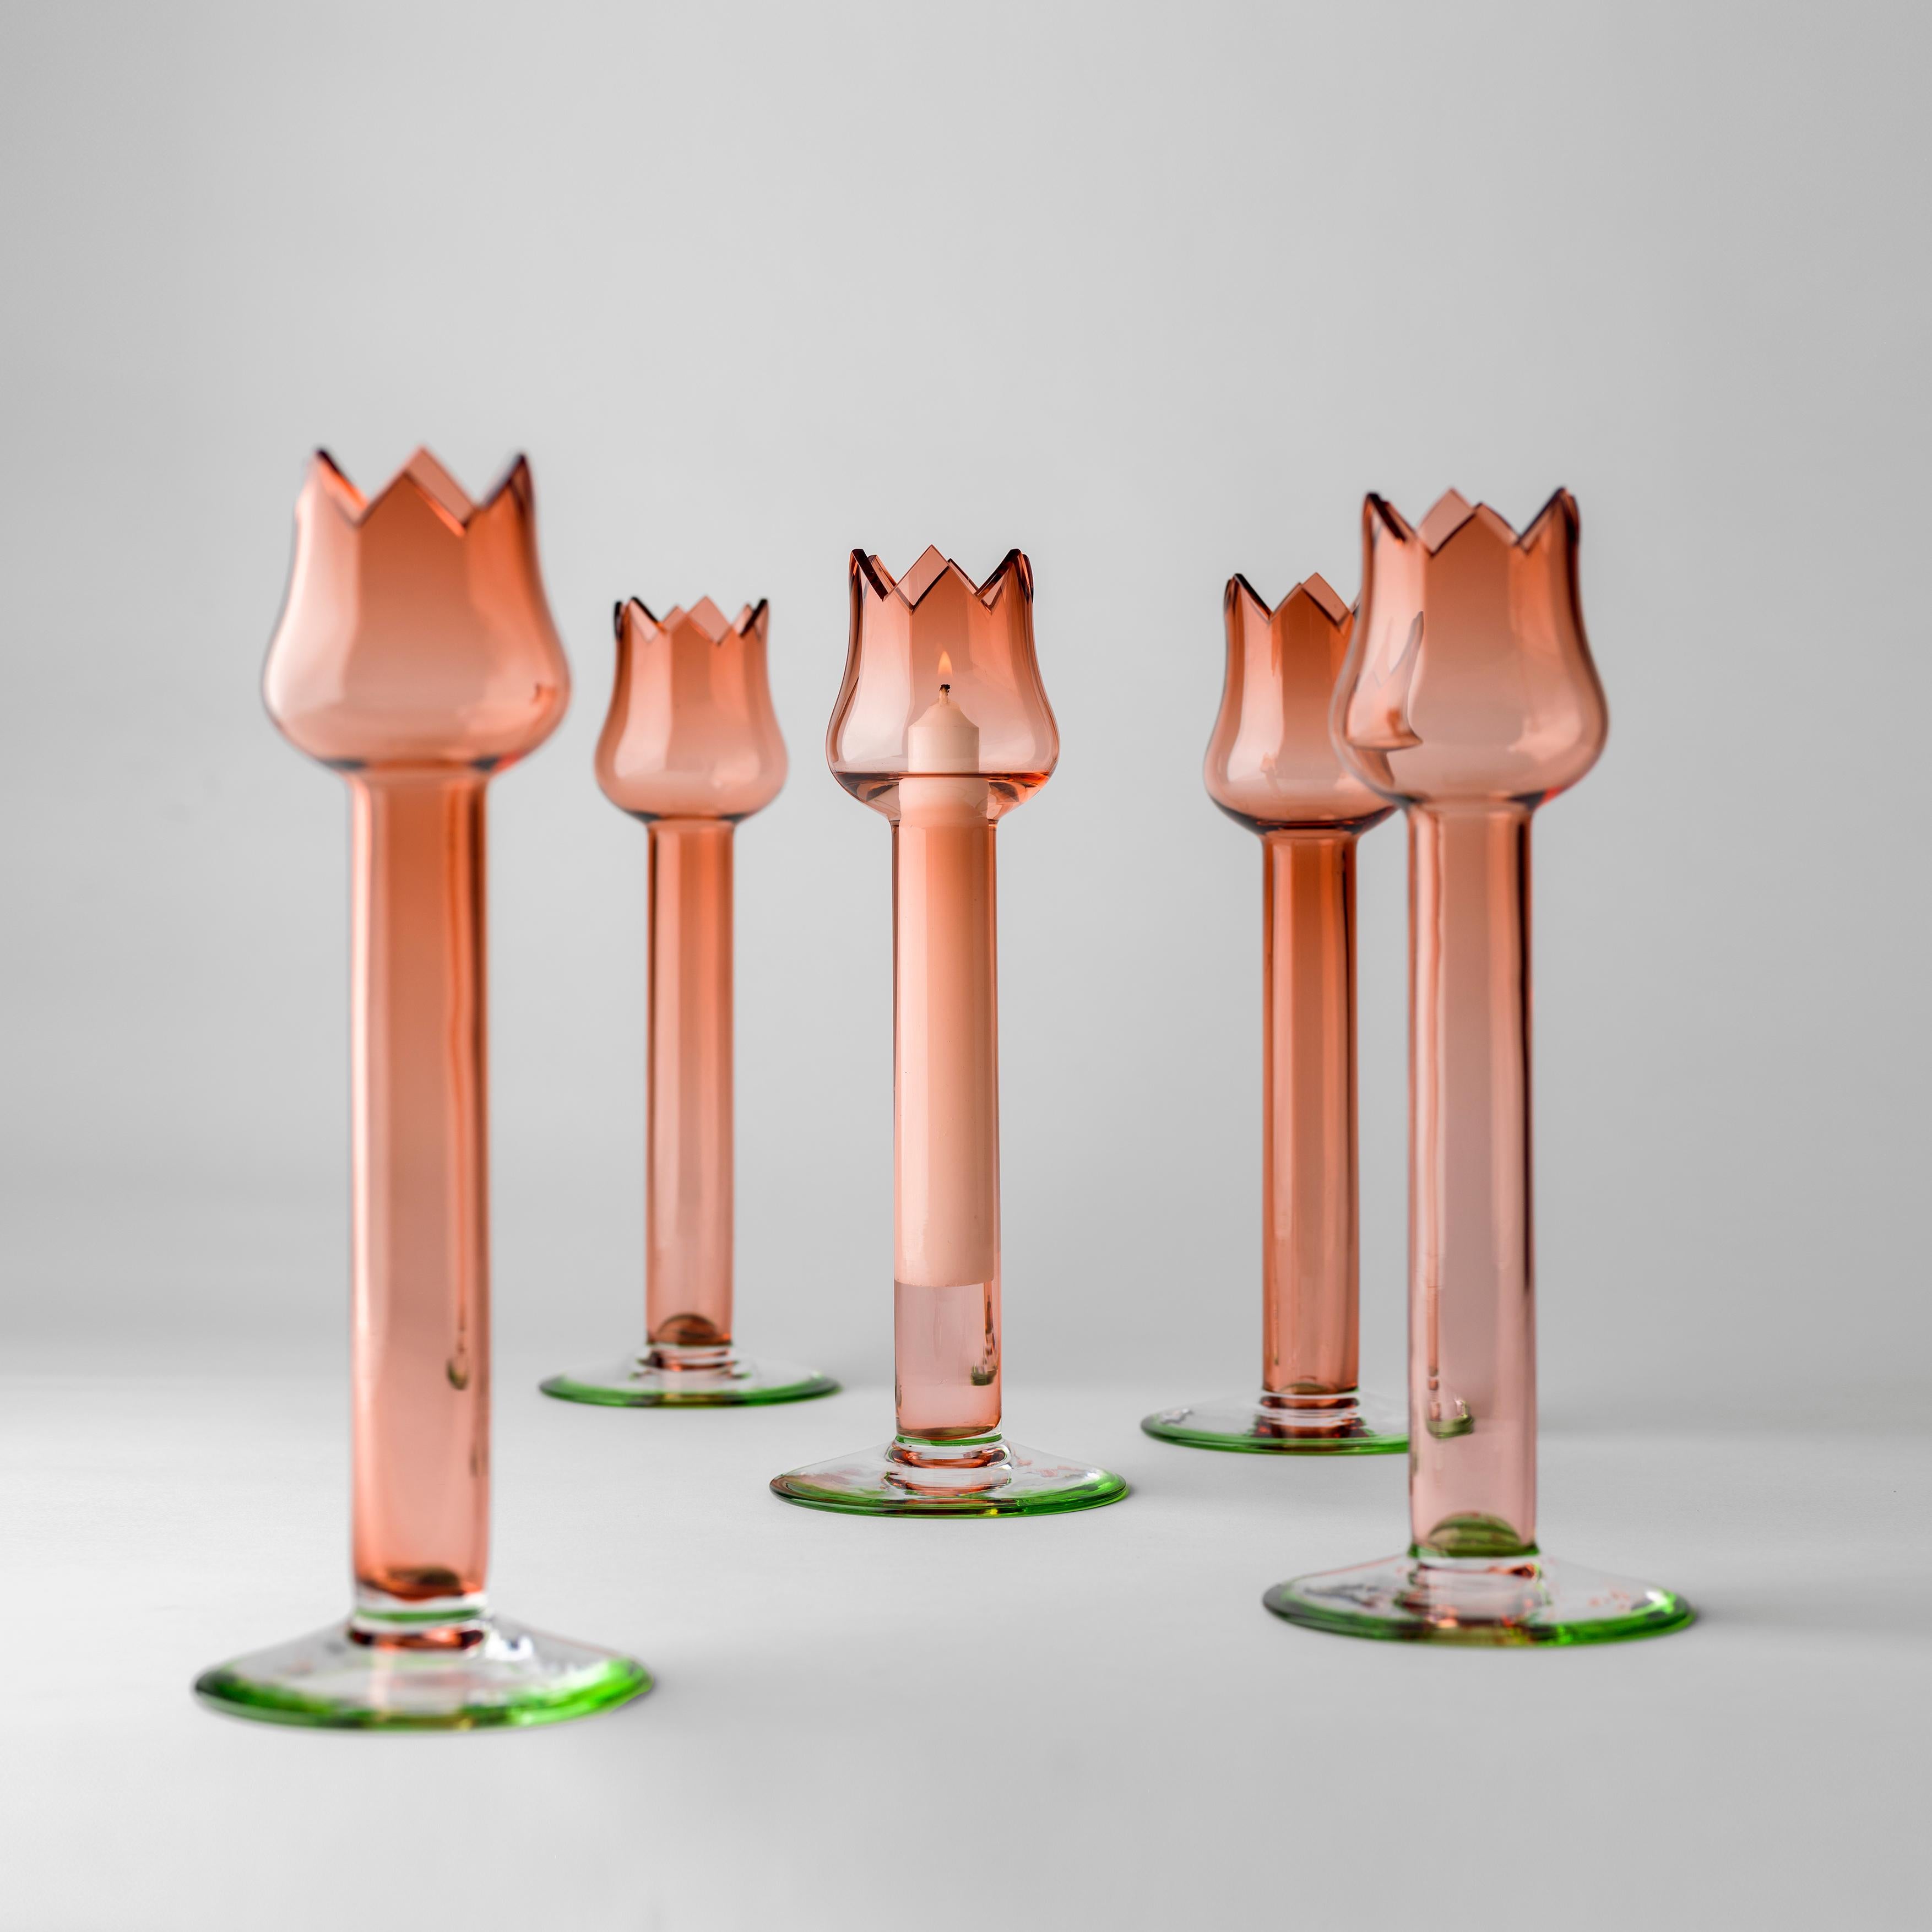 Contemporary Set of 5 Red Tulip Glass Candleholders by Oscar Tusquets for Bd Barcelona